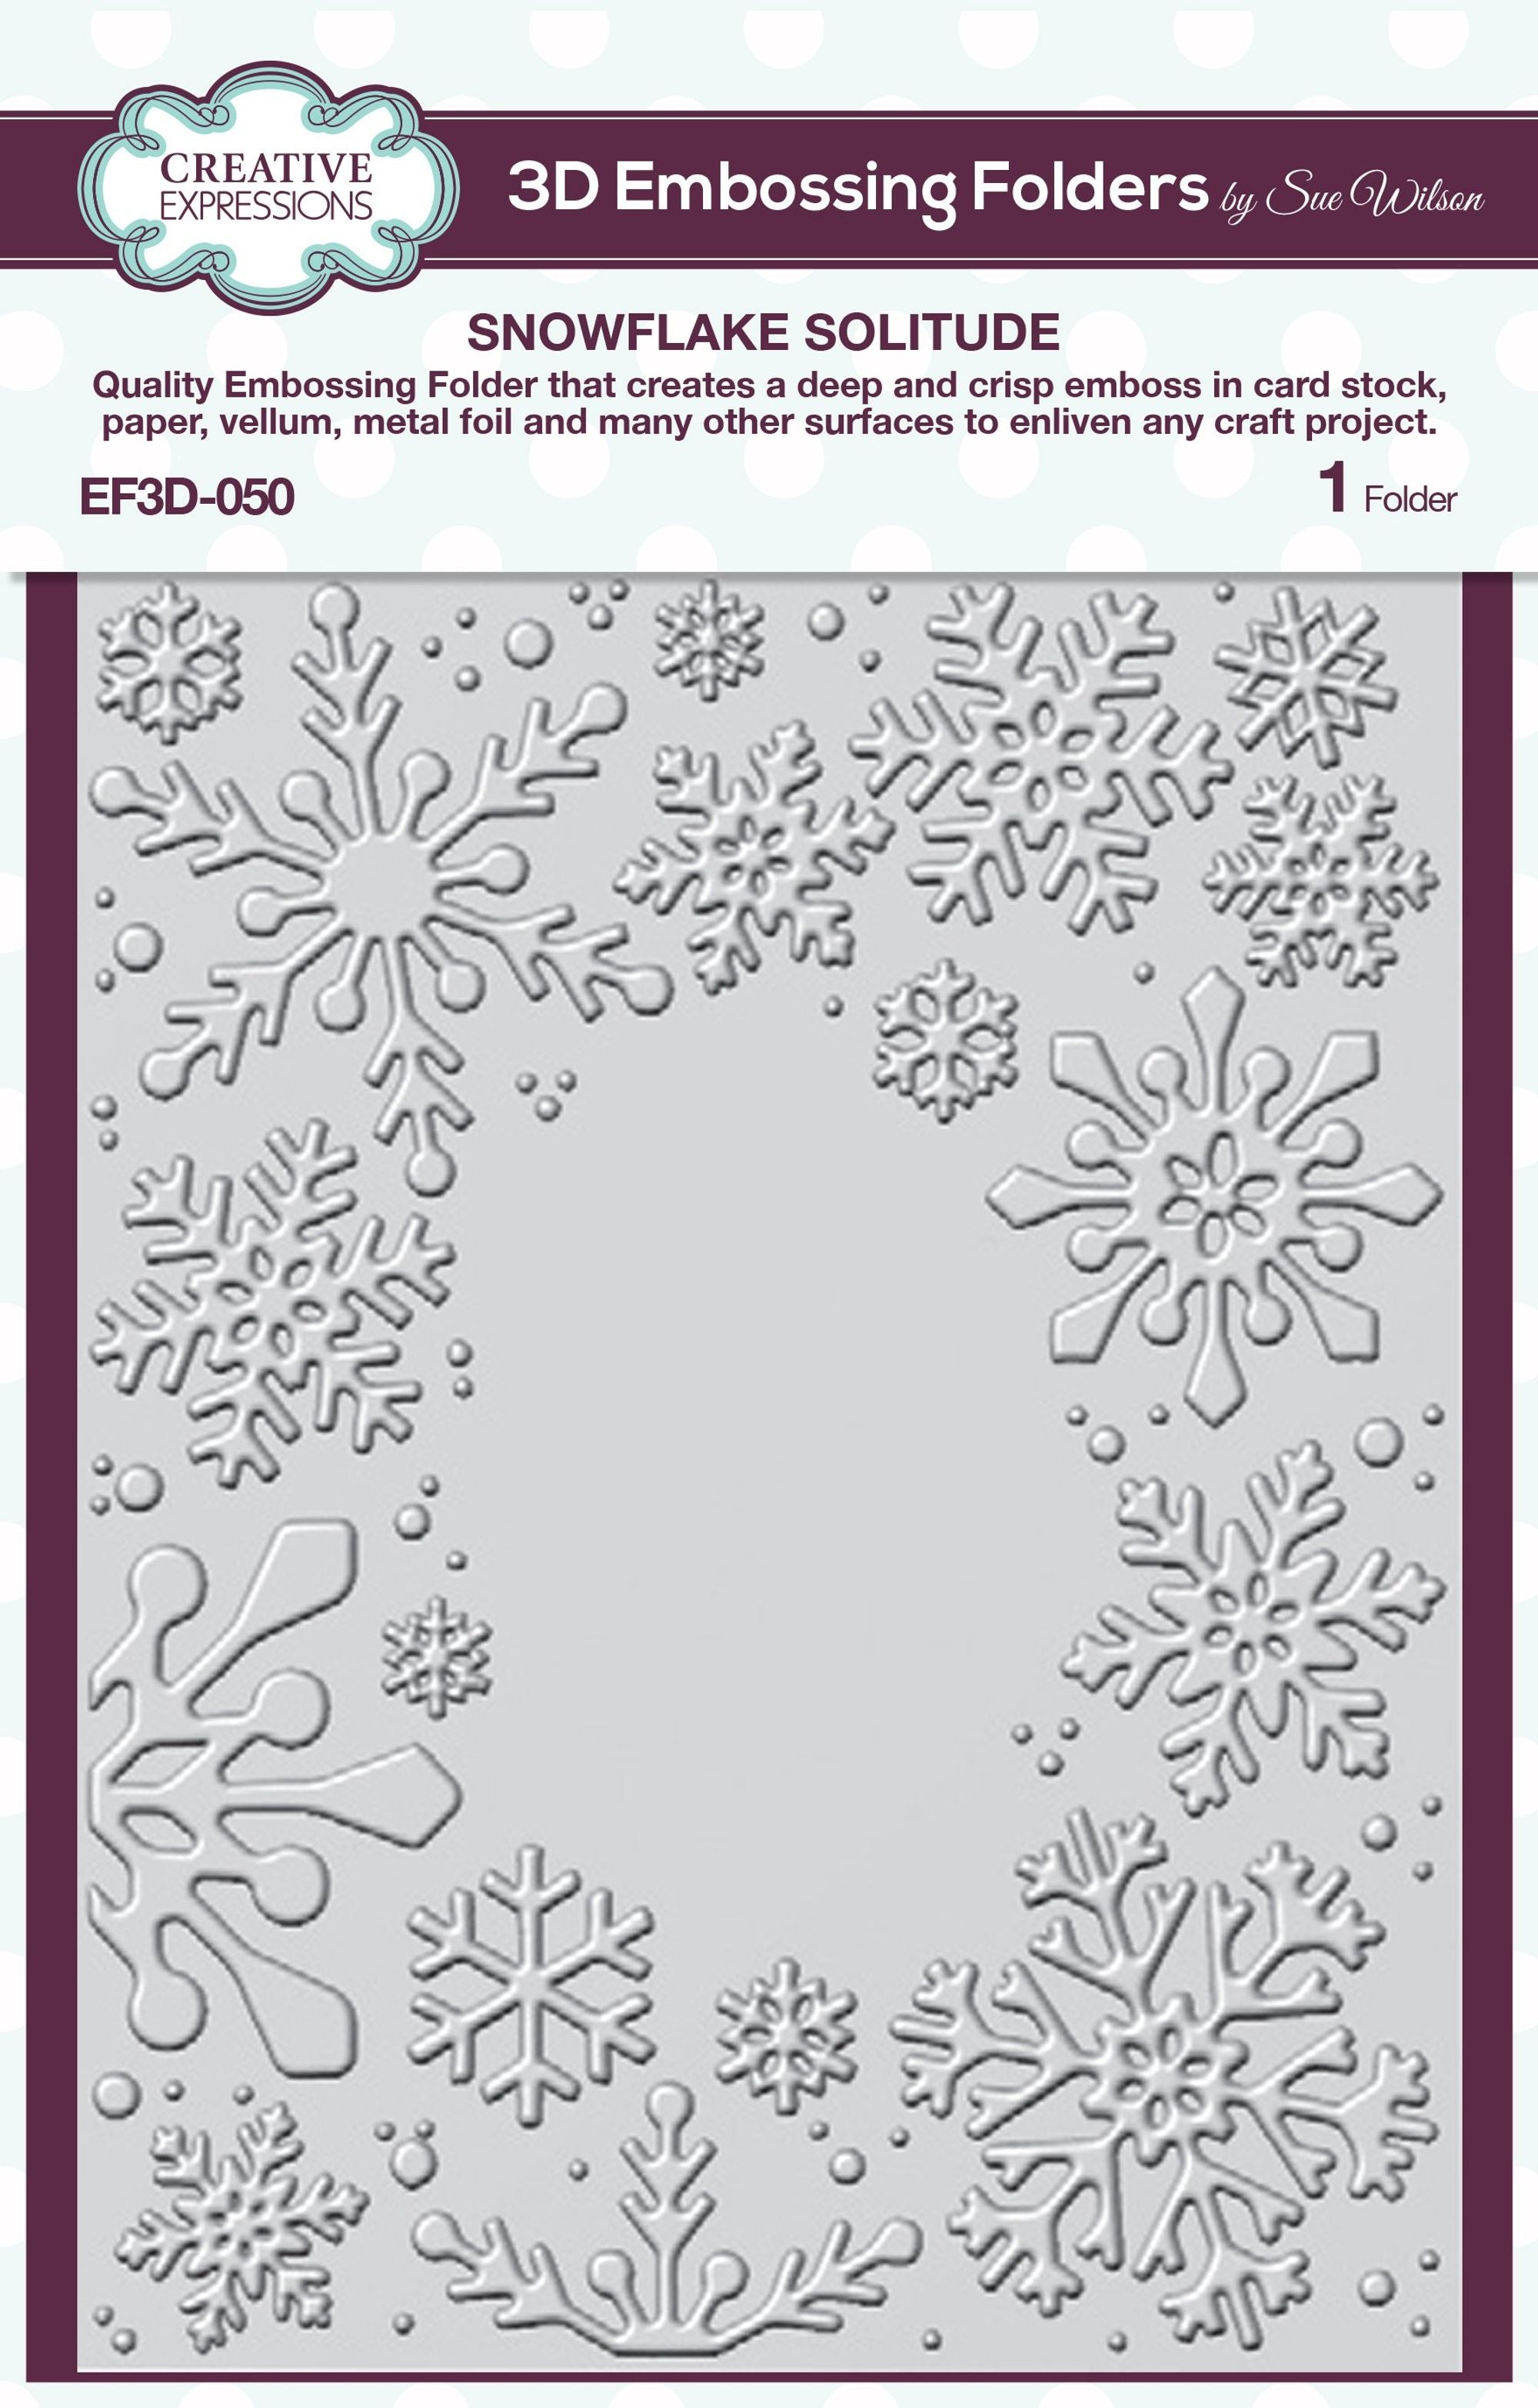 Creative Expressions 5x7in 3D Embossing Folders - Shimmering Snowflakes -  Scrapbooking Made Simple